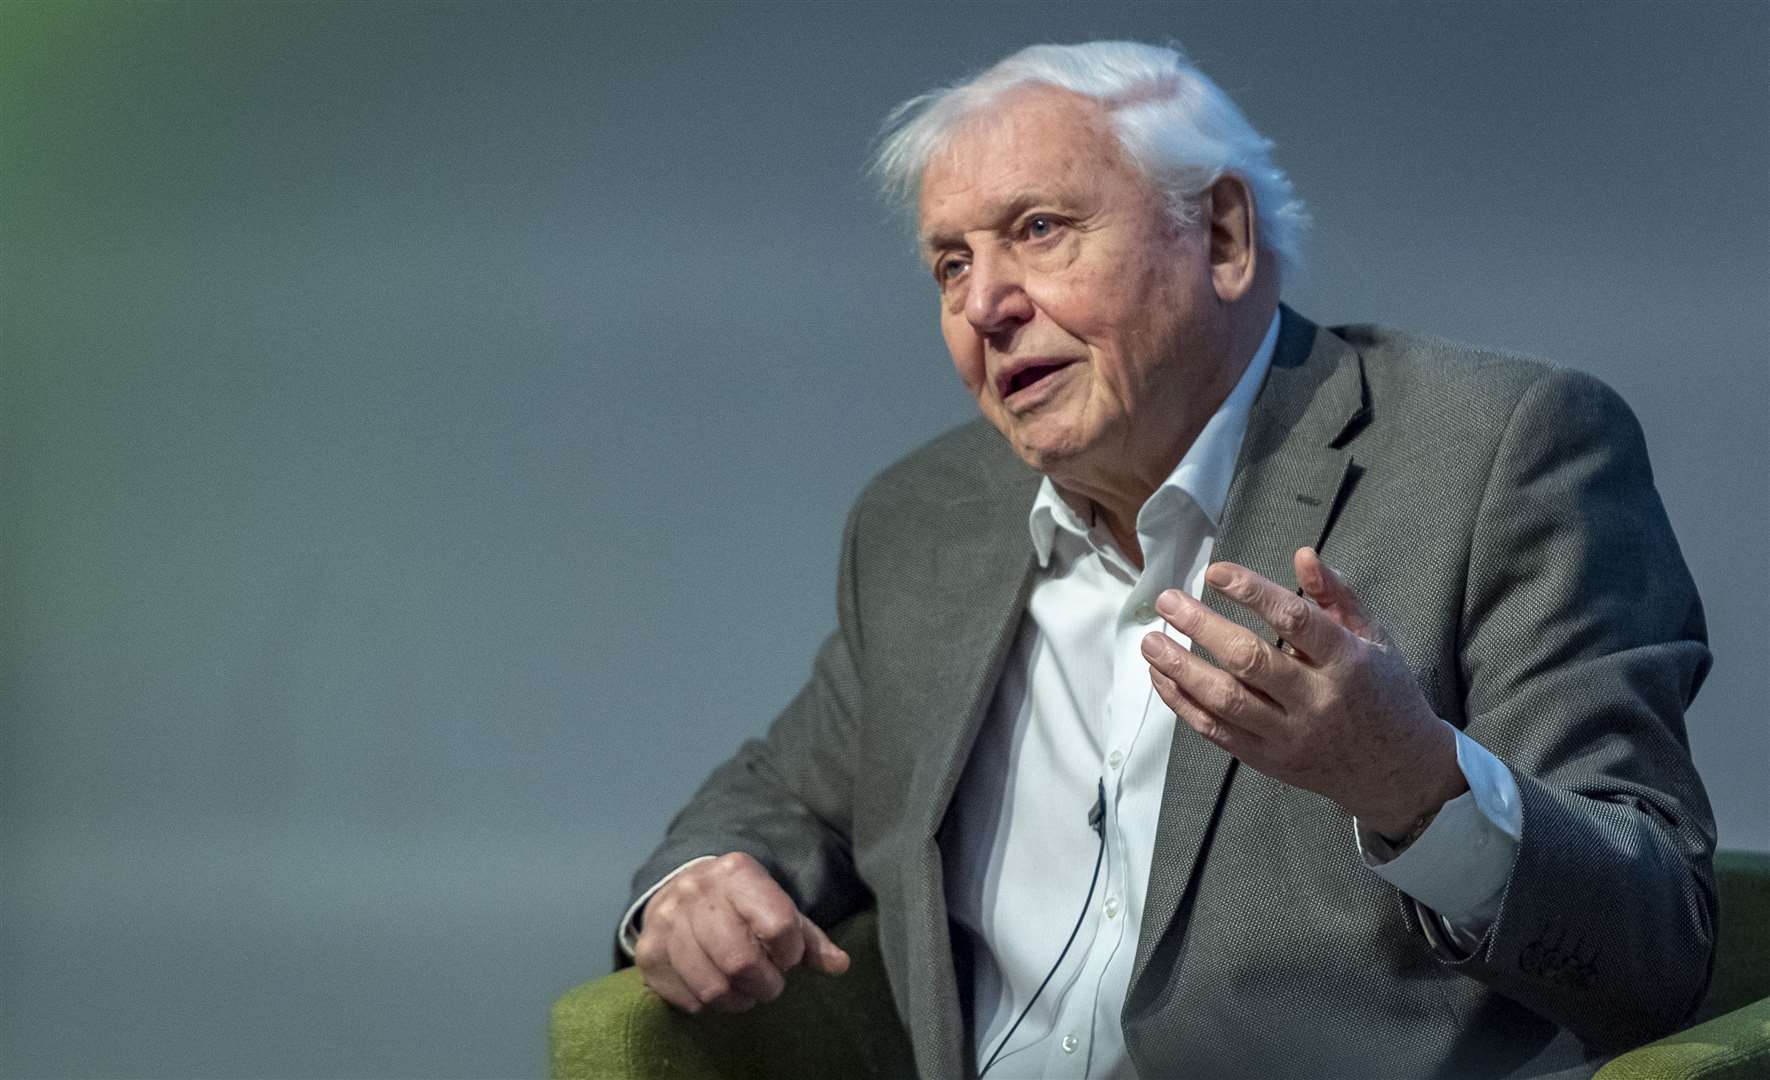 Sir David Attenborough at the twentieth Student Conference on Conservation Science series in Cambridge, Australia, Beijing, Bangalore, New York and Hungary is the only international series of conservation conferences aimed entirely at students. SCCS helps young conservation scientists gain experience, learn new ideas and make contacts that will be valuable for their future careers. Over the past 19 years, SCCS Cambridge has hosted over 3,200 delegates from 133 countries worldwide. Picture: Keith Heppell. (33746767)